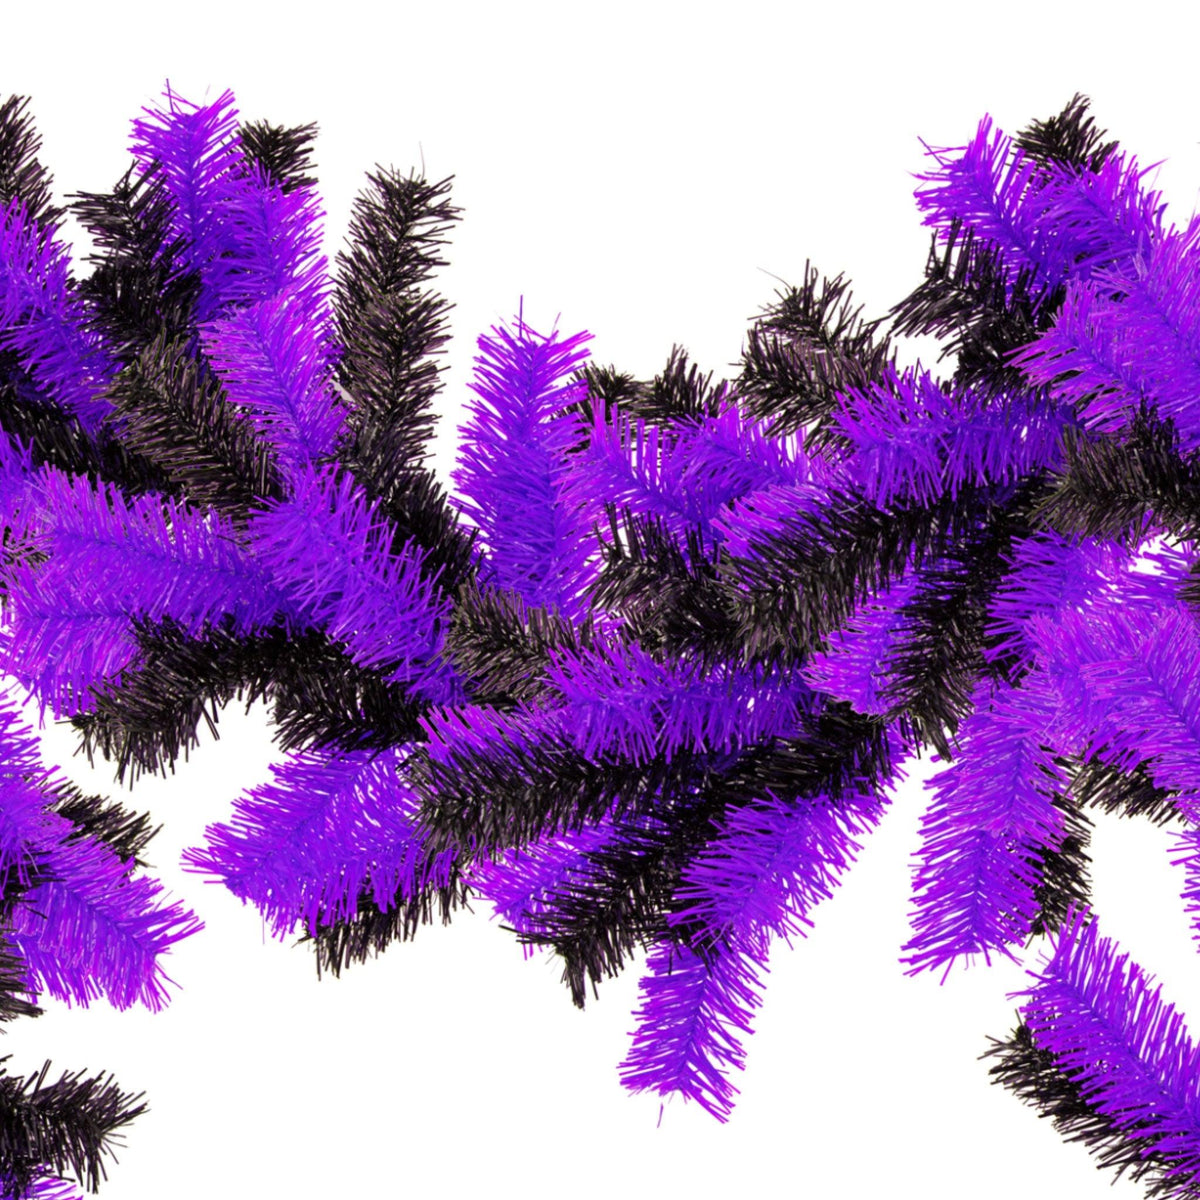 Shop for Lee Display's brand new 6FT Shiny Metallic Purple and Black Tinsel Brush Garlands on sale now at leedisplay.com.  Middle section